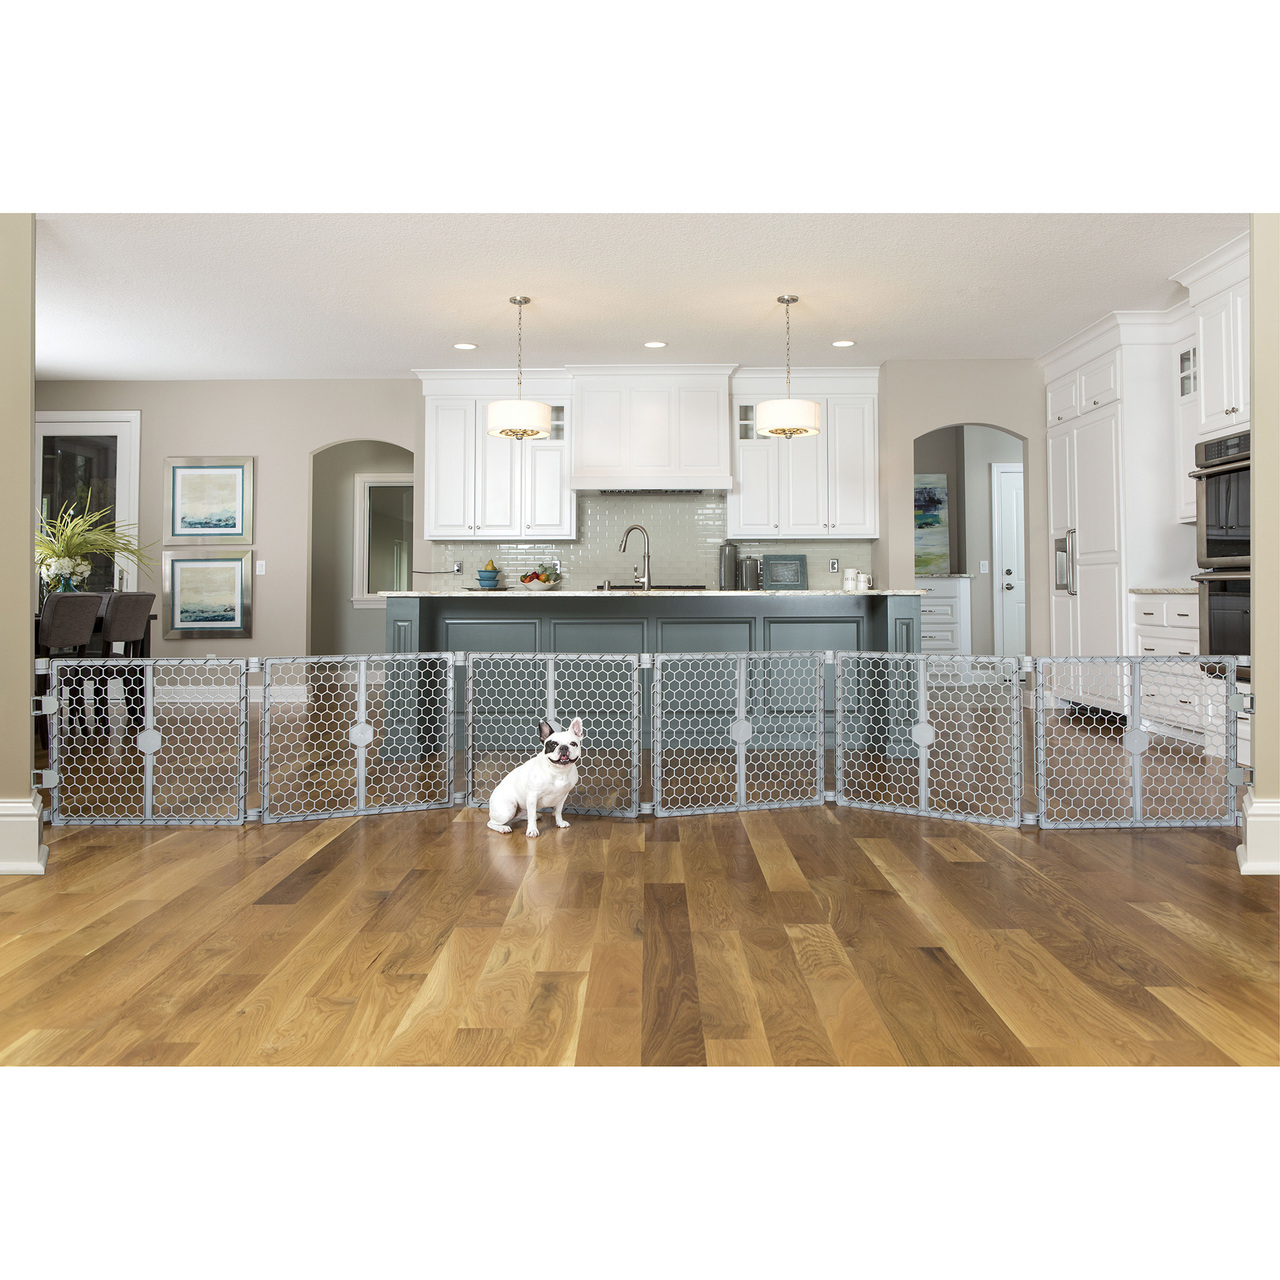 2-IN-1 Plastic Gate and Pet Pen